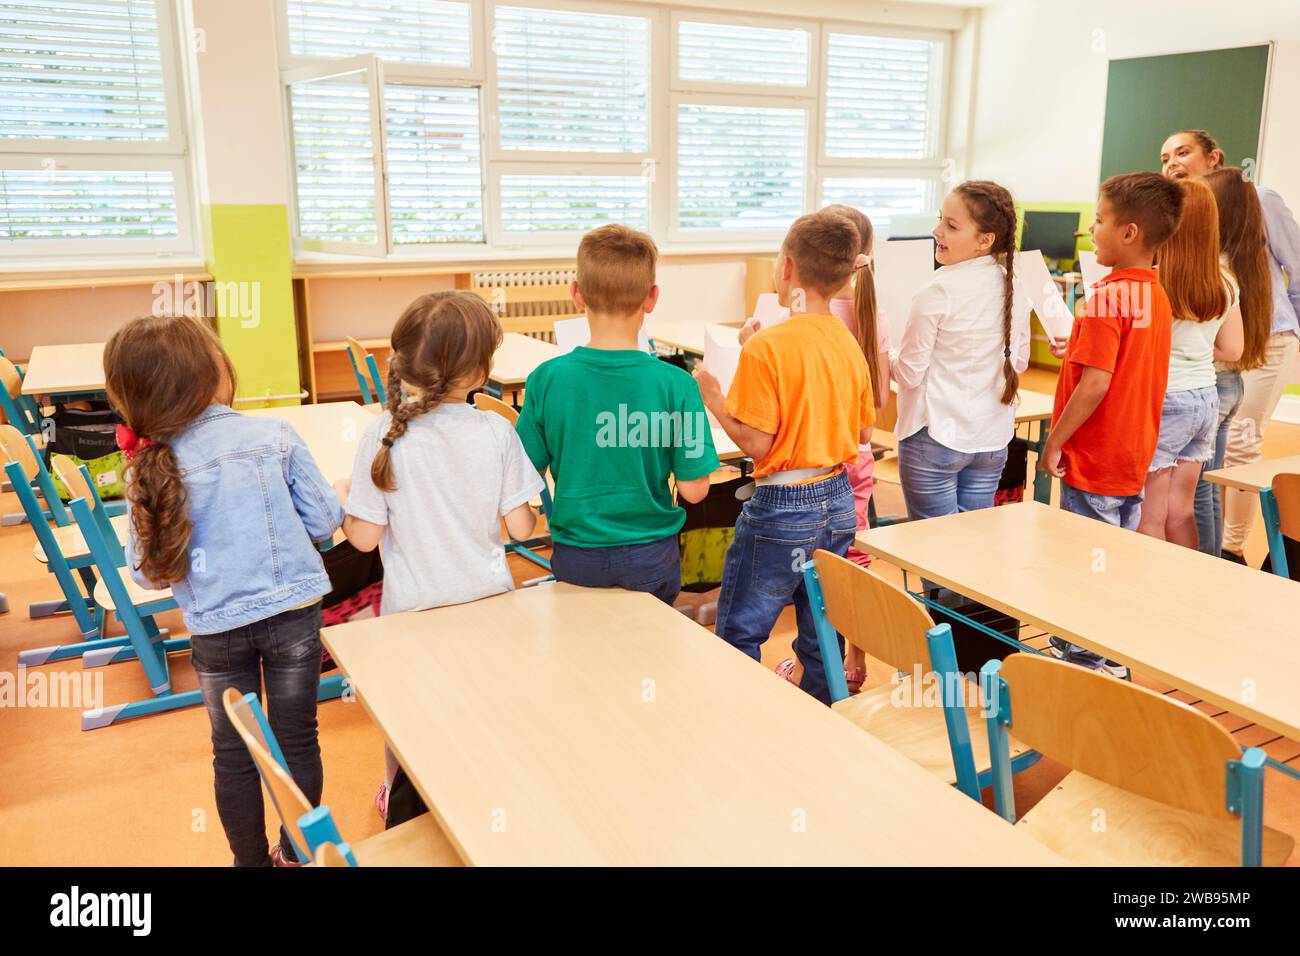 Rear view of male and female students standing side by side with teacher during activity in class Stock Photo